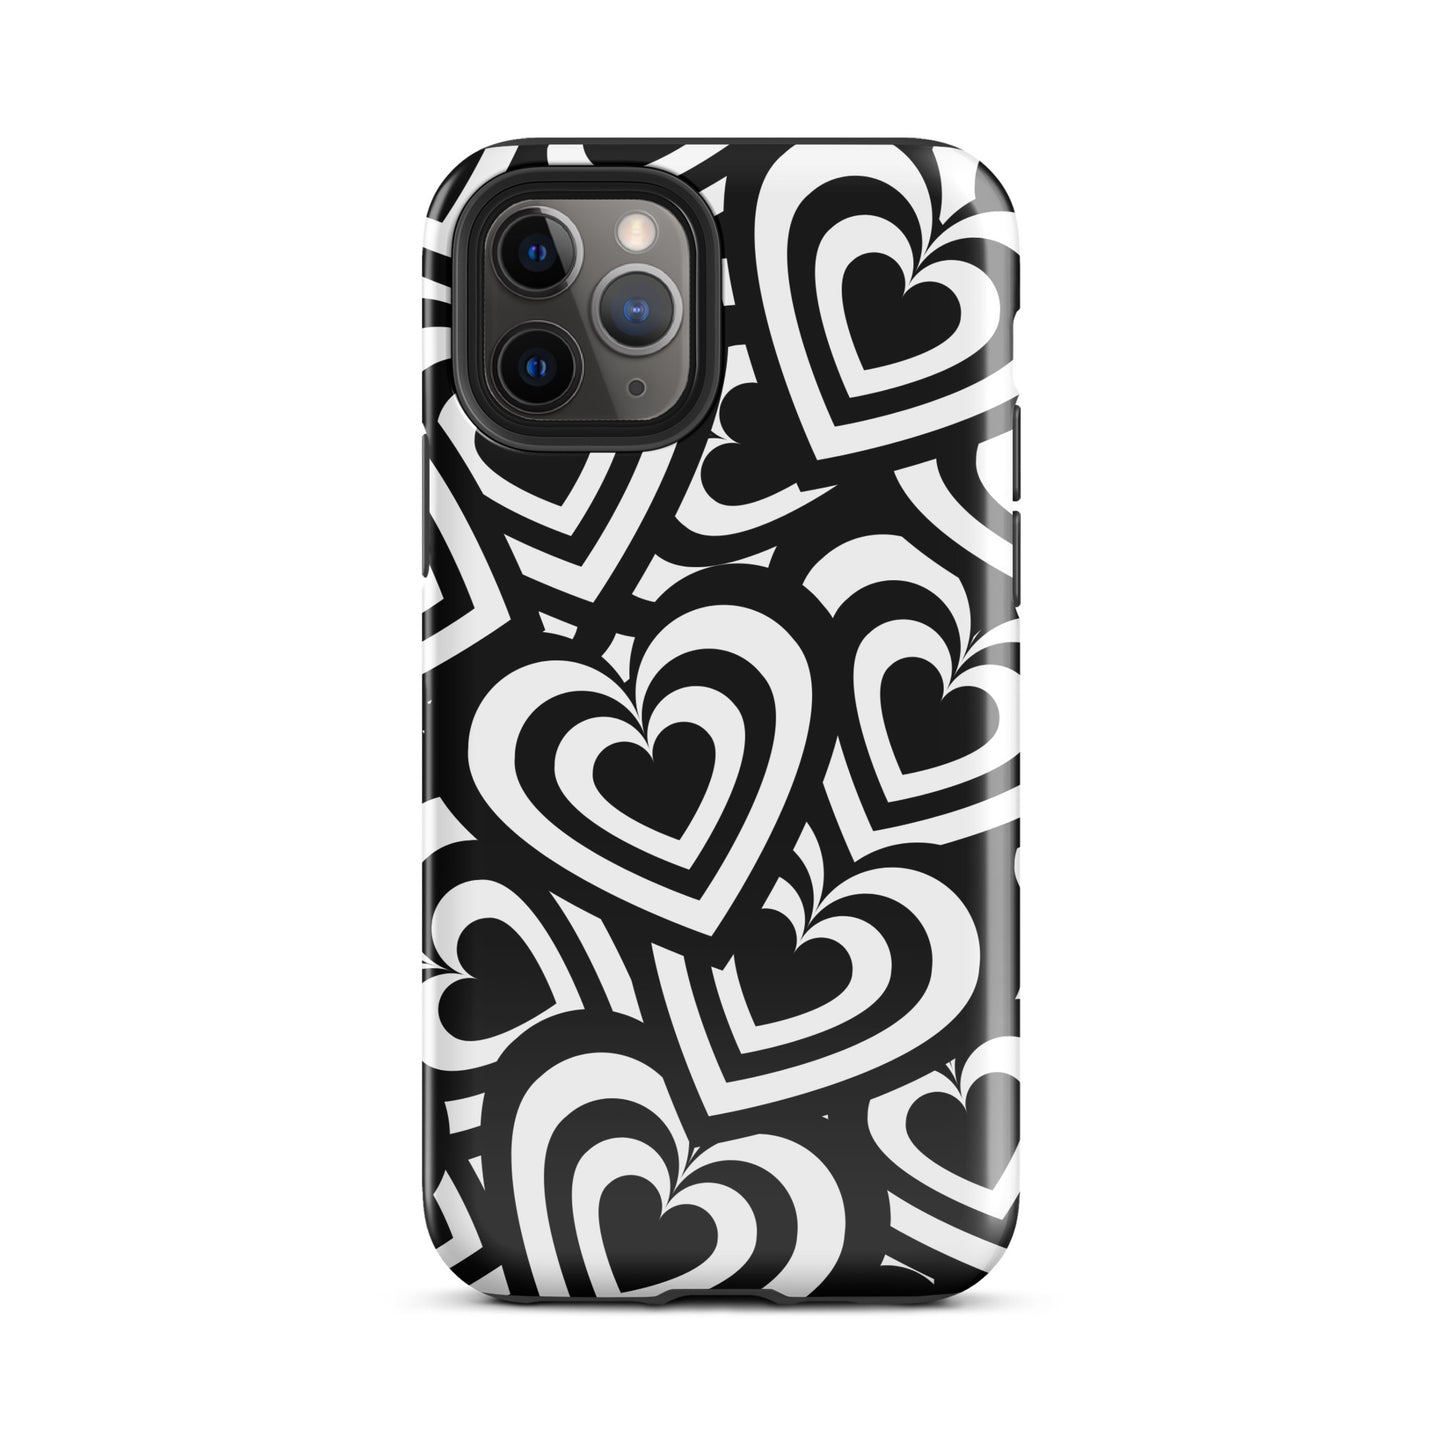 Black & White Hearts iPhone Case iPhone 11 Pro Glossy